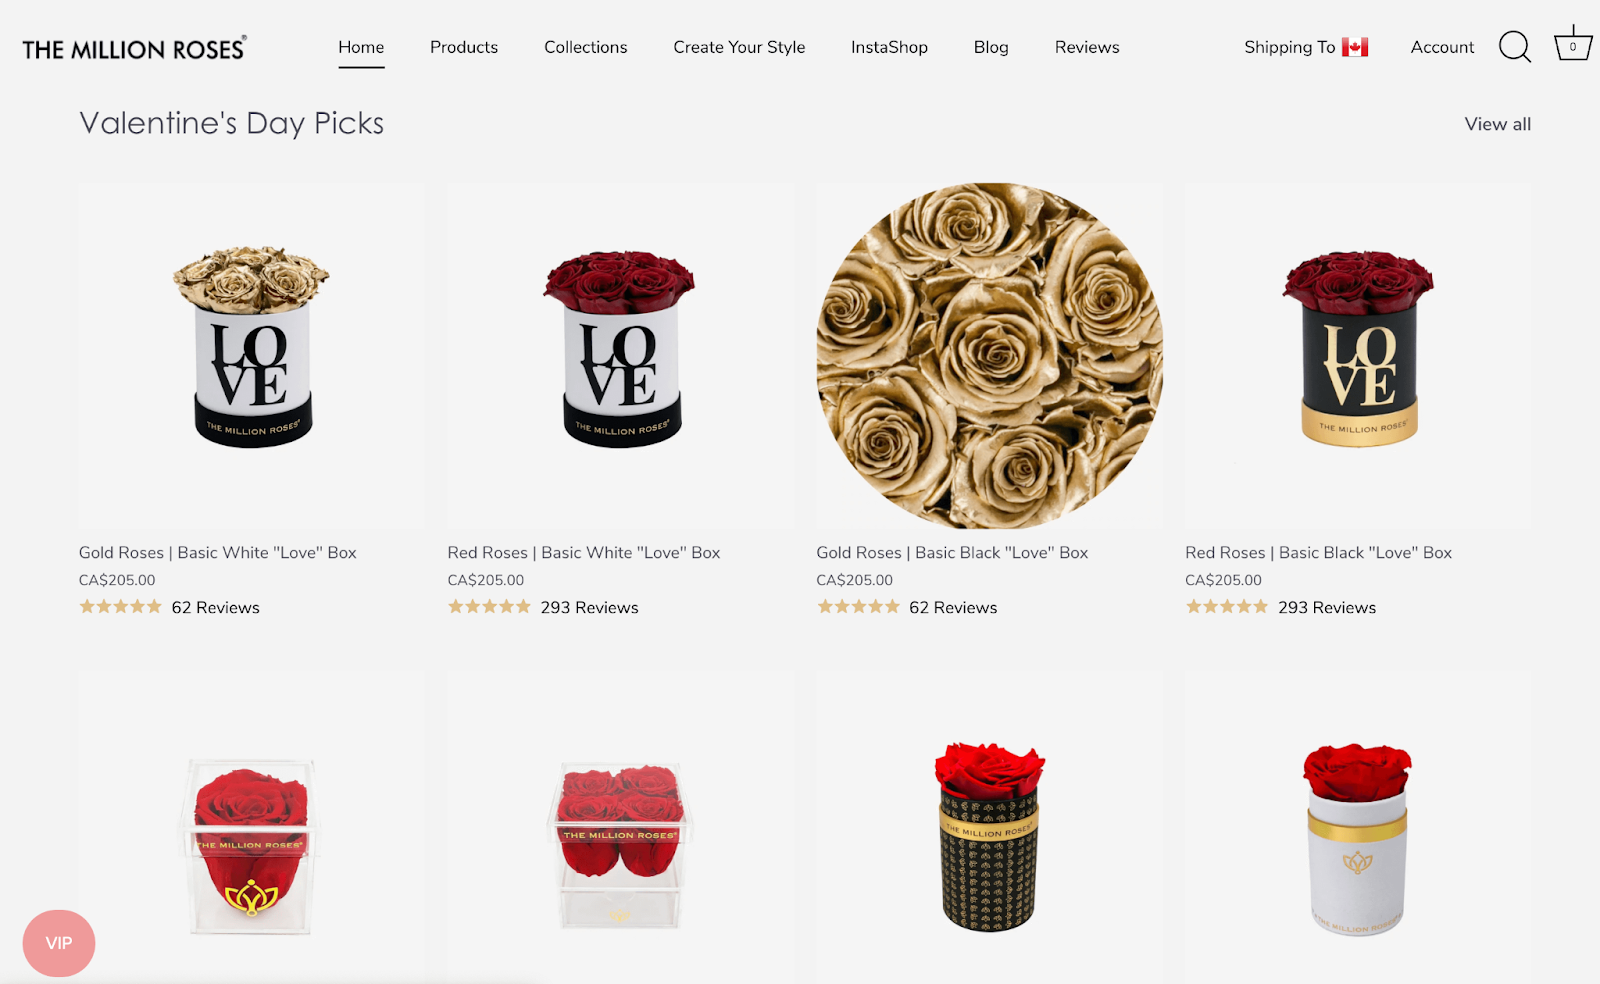  Valentine’s Day Gift Guide–A screenshot from The Million Roses’ website of their “Valentine’s Day Picks” page showing 8 different rose arrangements. 